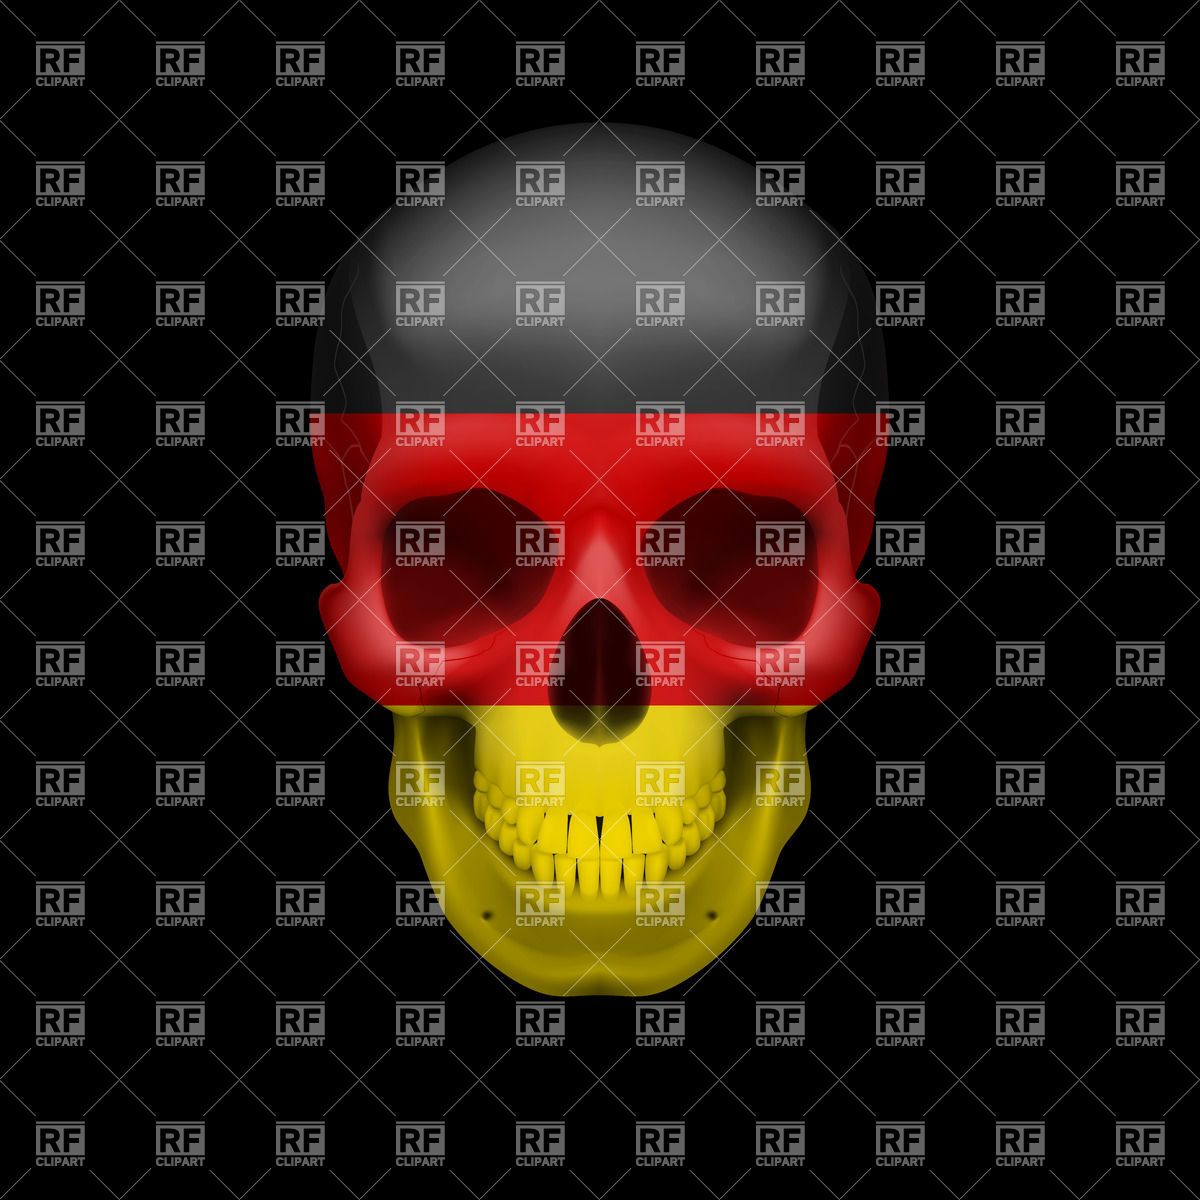 Human Skull With Flag Of Germany 35145 Download Royalty Free Vector